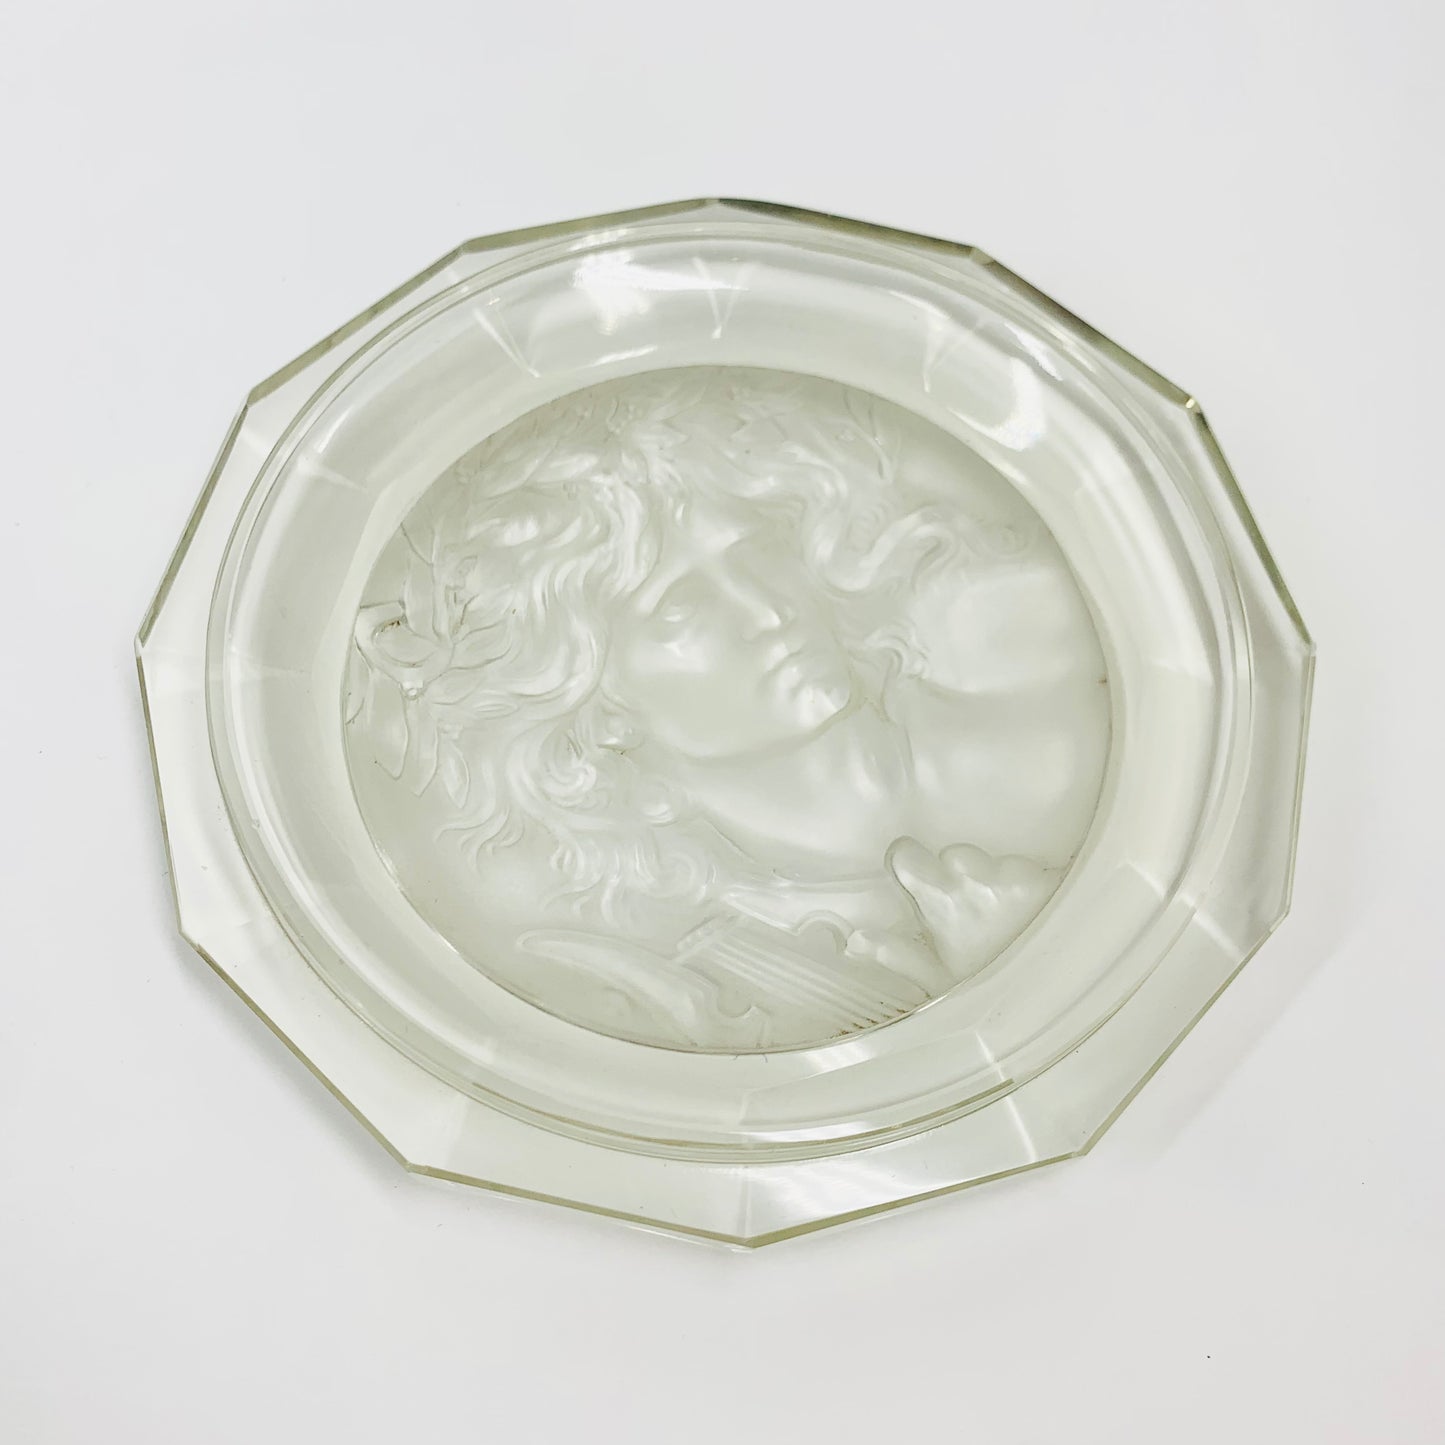 Rare antique pressed glass plate with the God Apollo relief